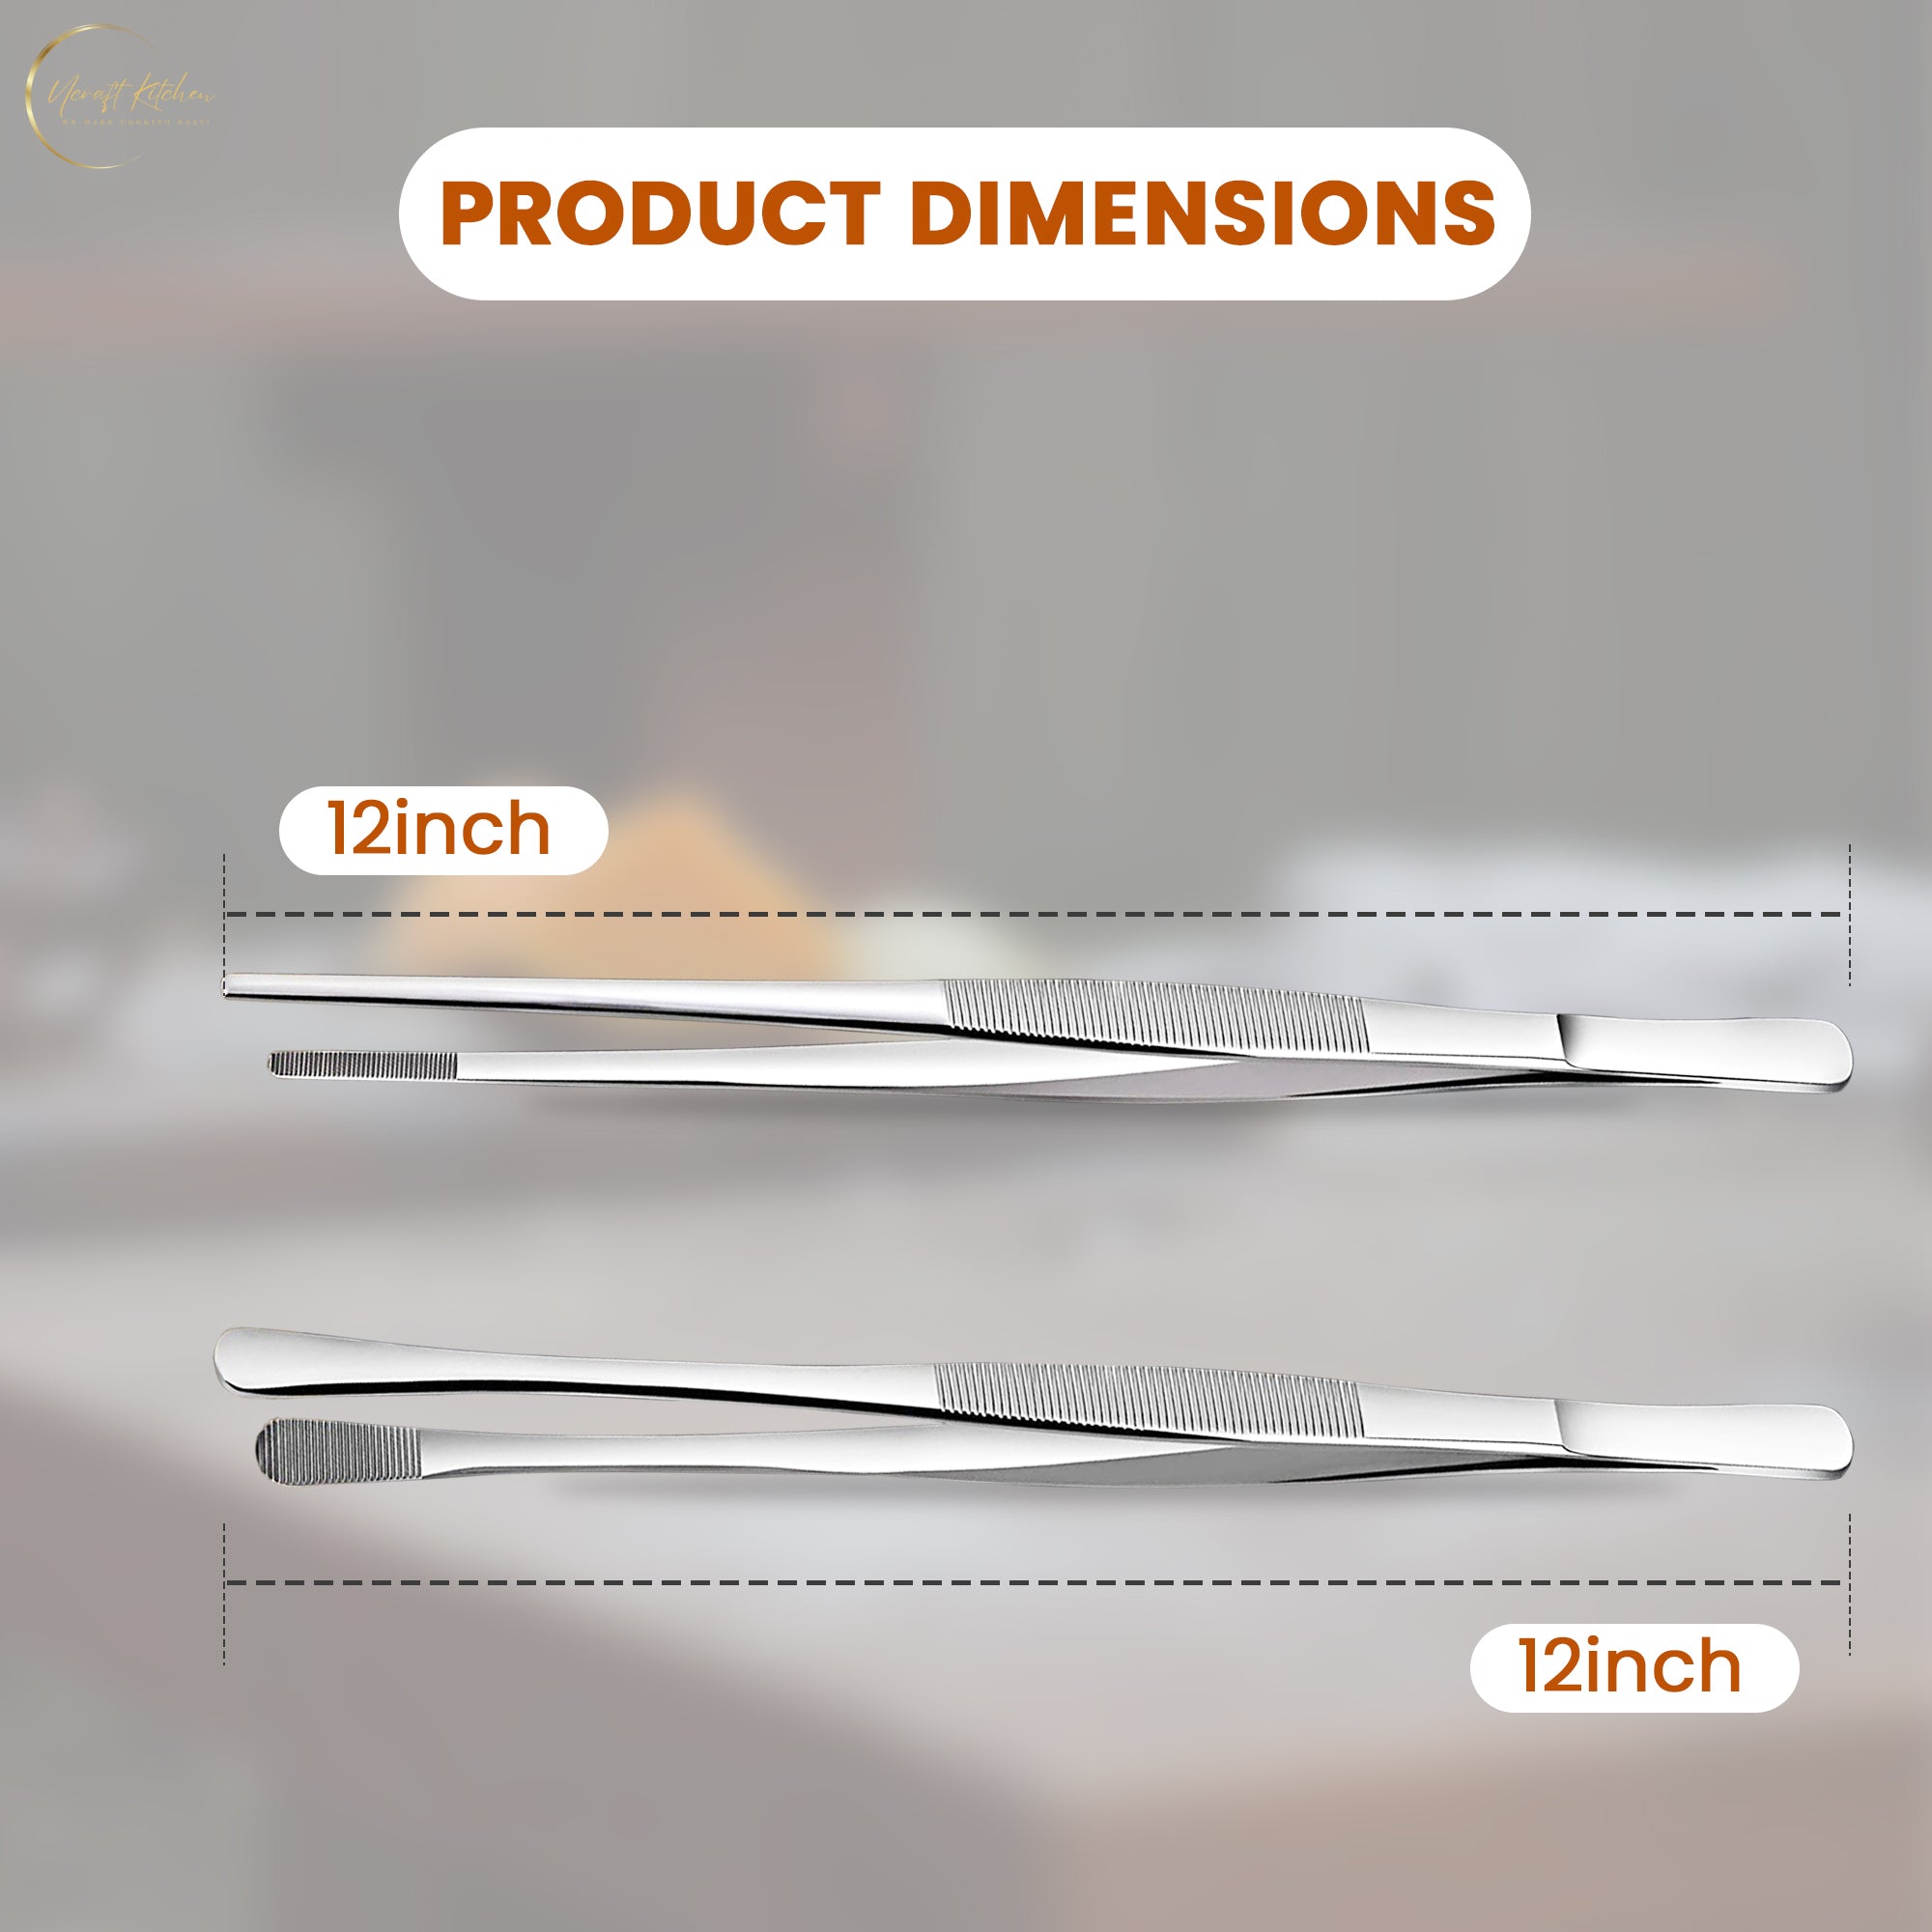 Kitchen Tweezers (x2) – Stainless Steel – 12 Inches Long – Non-Slip – For Cooking, Plating, Serving and Decorating by Ucraft Kitchen. (Thin and thick tip)